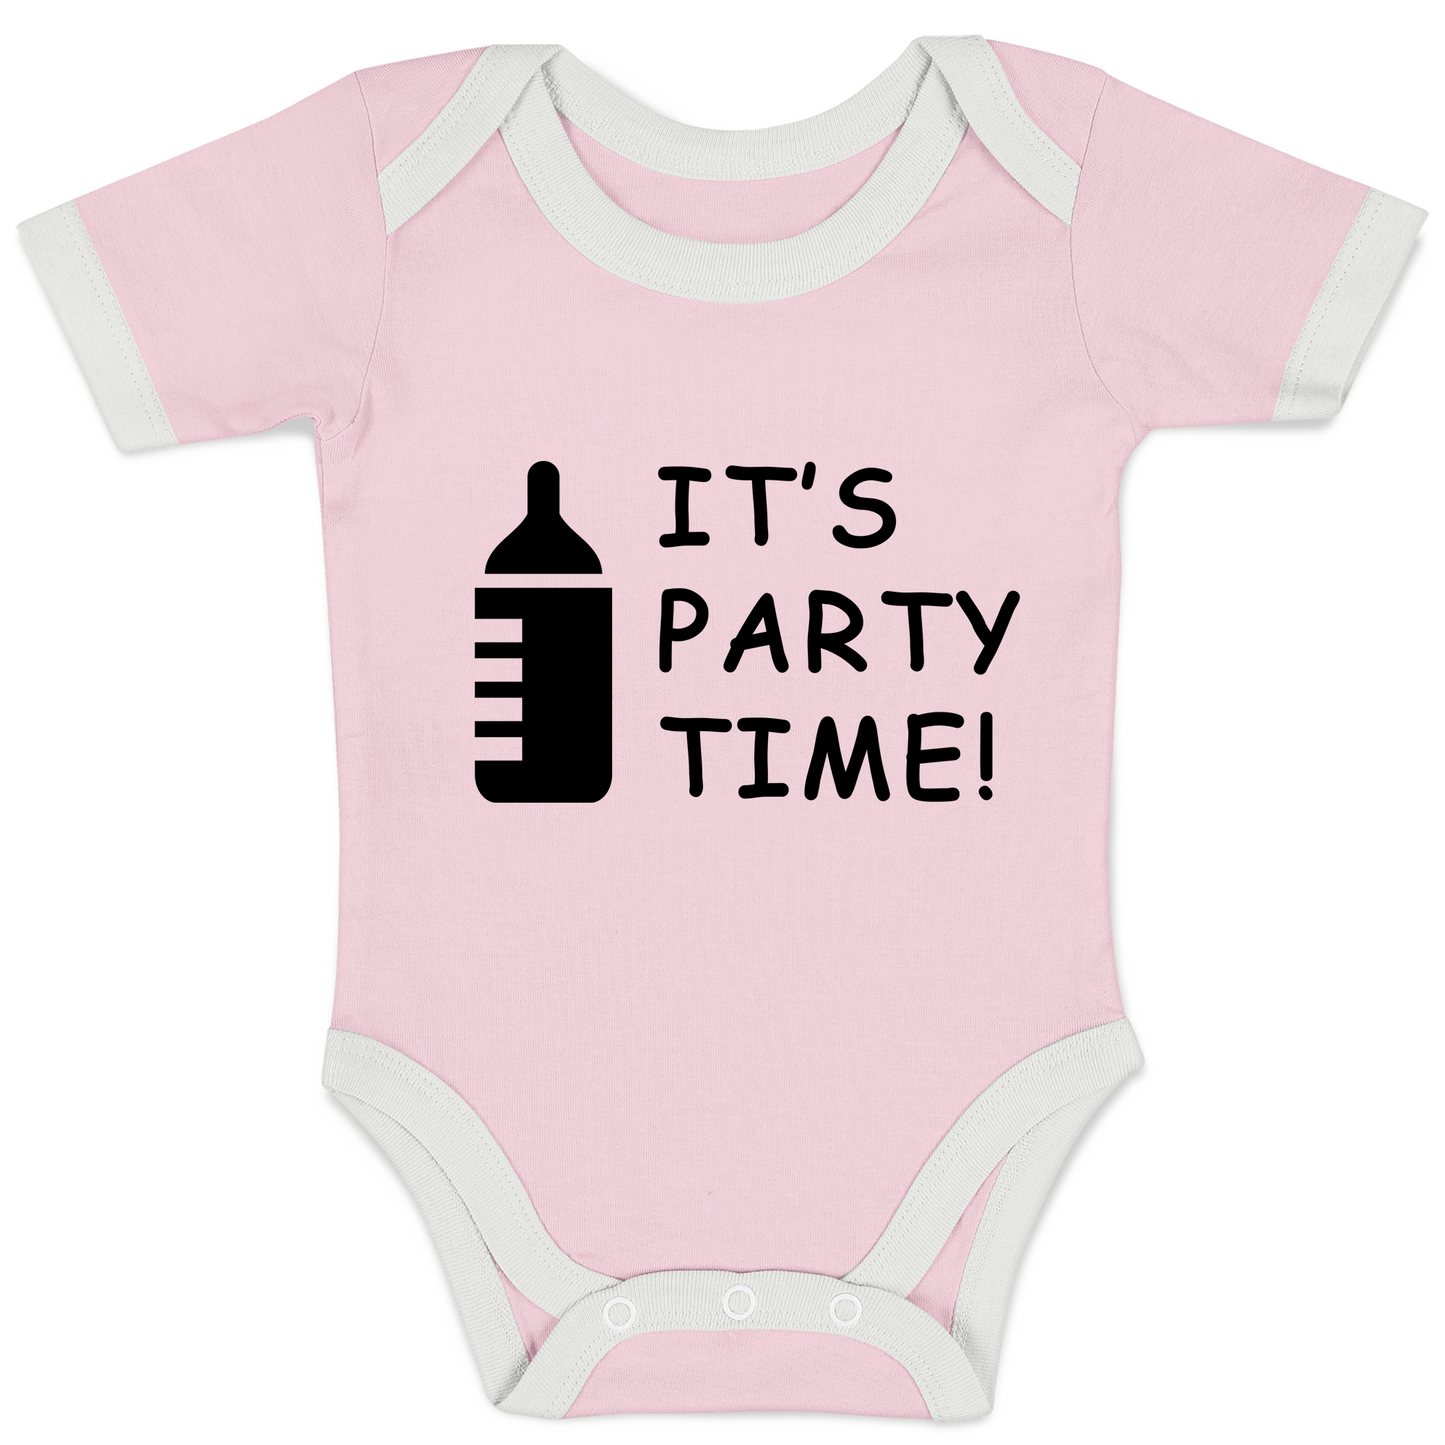 Endanzoo Organic Baby Bodysuit - It's Party Time